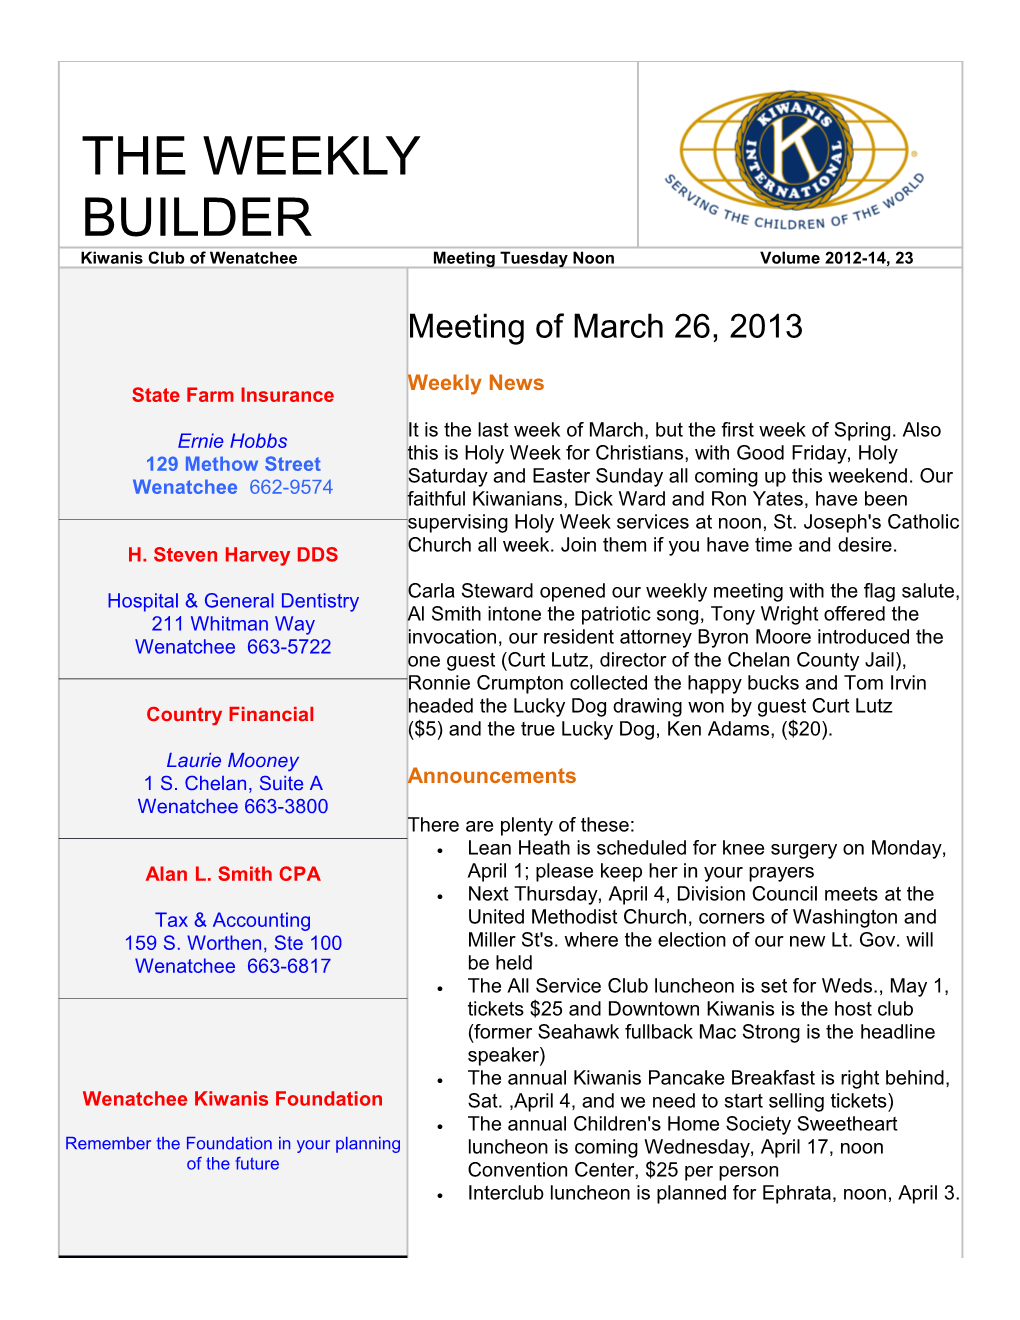 The Weekly Builder